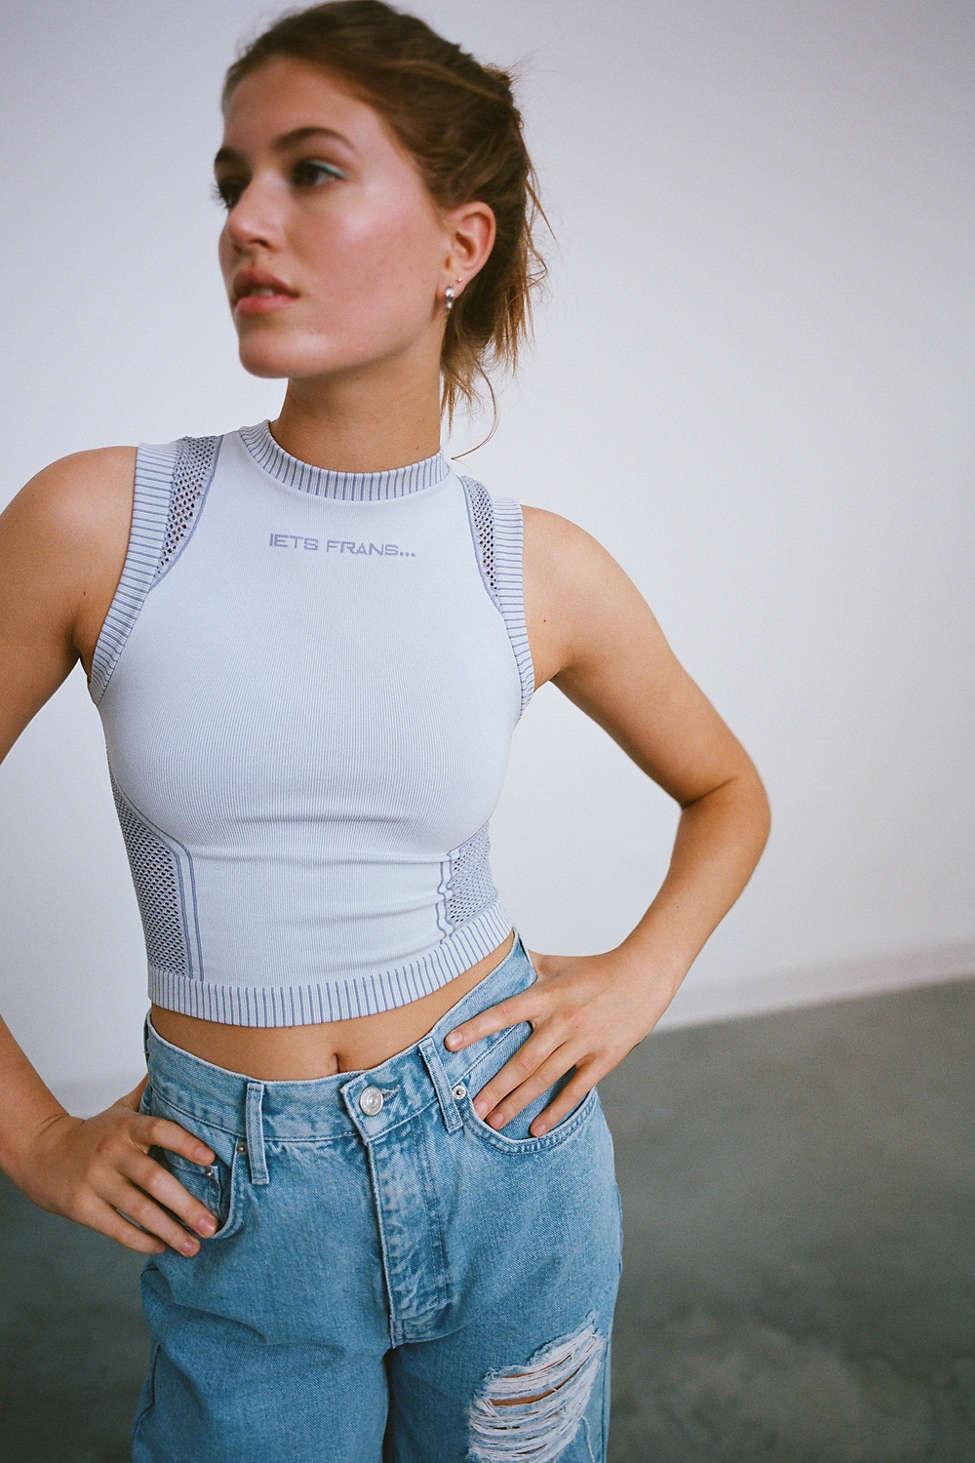 iets frans... Serena Cropped Tank Top in Blue | Lyst